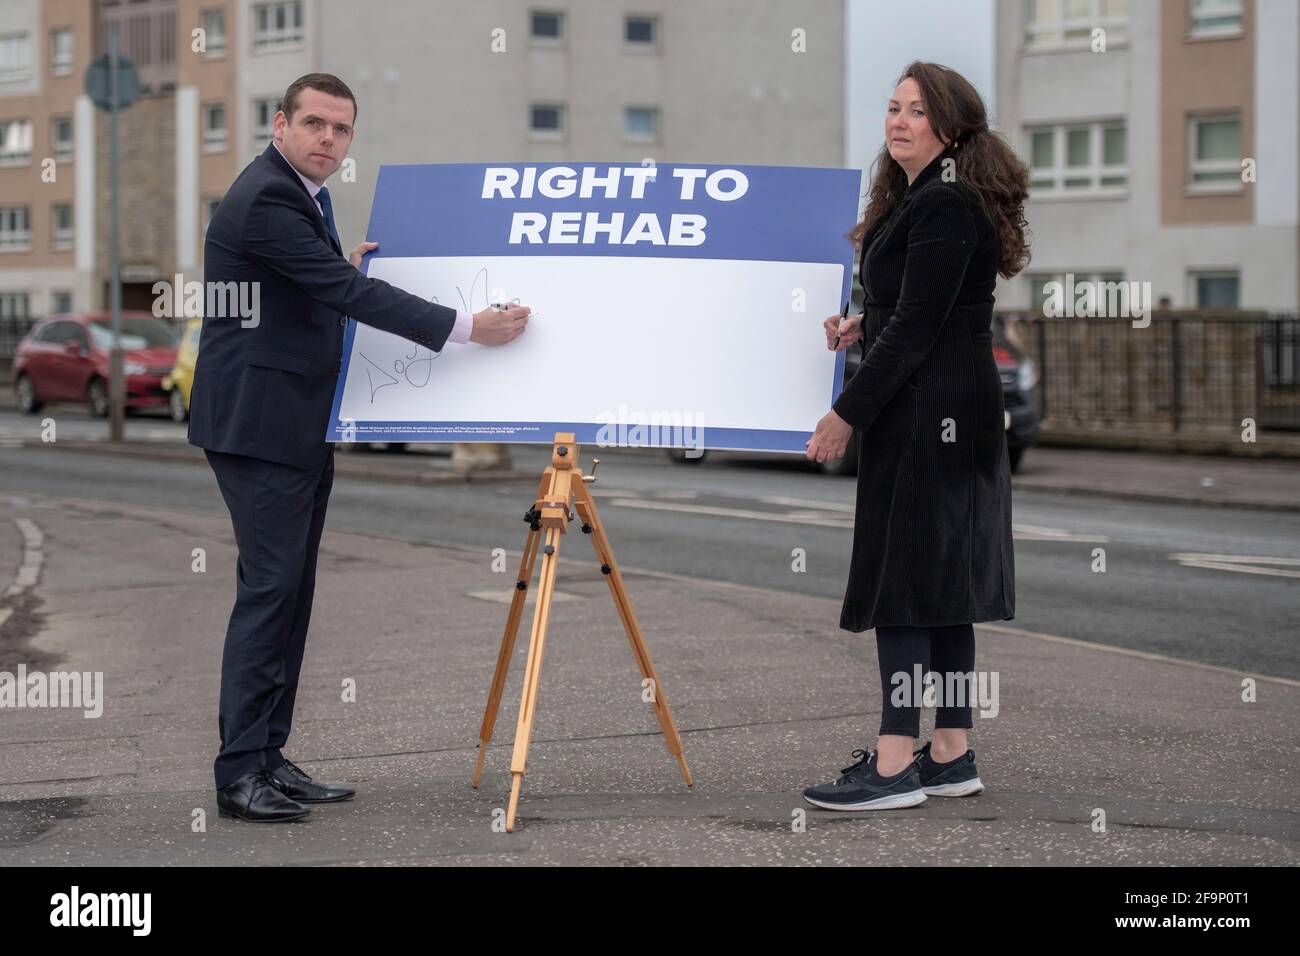 Glasgow, Scotland, UK. 20 April 2021. PICTURED: (left) Douglas Ross MP, Scottish Conservative and Unionist Party Leader, (right) Annemarie Ward, Advocacy Activist for those suffering and recovering from addiction and CEO of FAVORUK. Scottish Conservative leader Douglas Ross said: “For too long, the government has taken its eye off the ball, by its own admission. Tackling drug deaths has not been a priority and that has to change now. Too many lives have already been lost. Recovery experts have raised the alarm that Scotland's drug deaths figures “undoubtedly will rise” as people still cannot Stock Photo